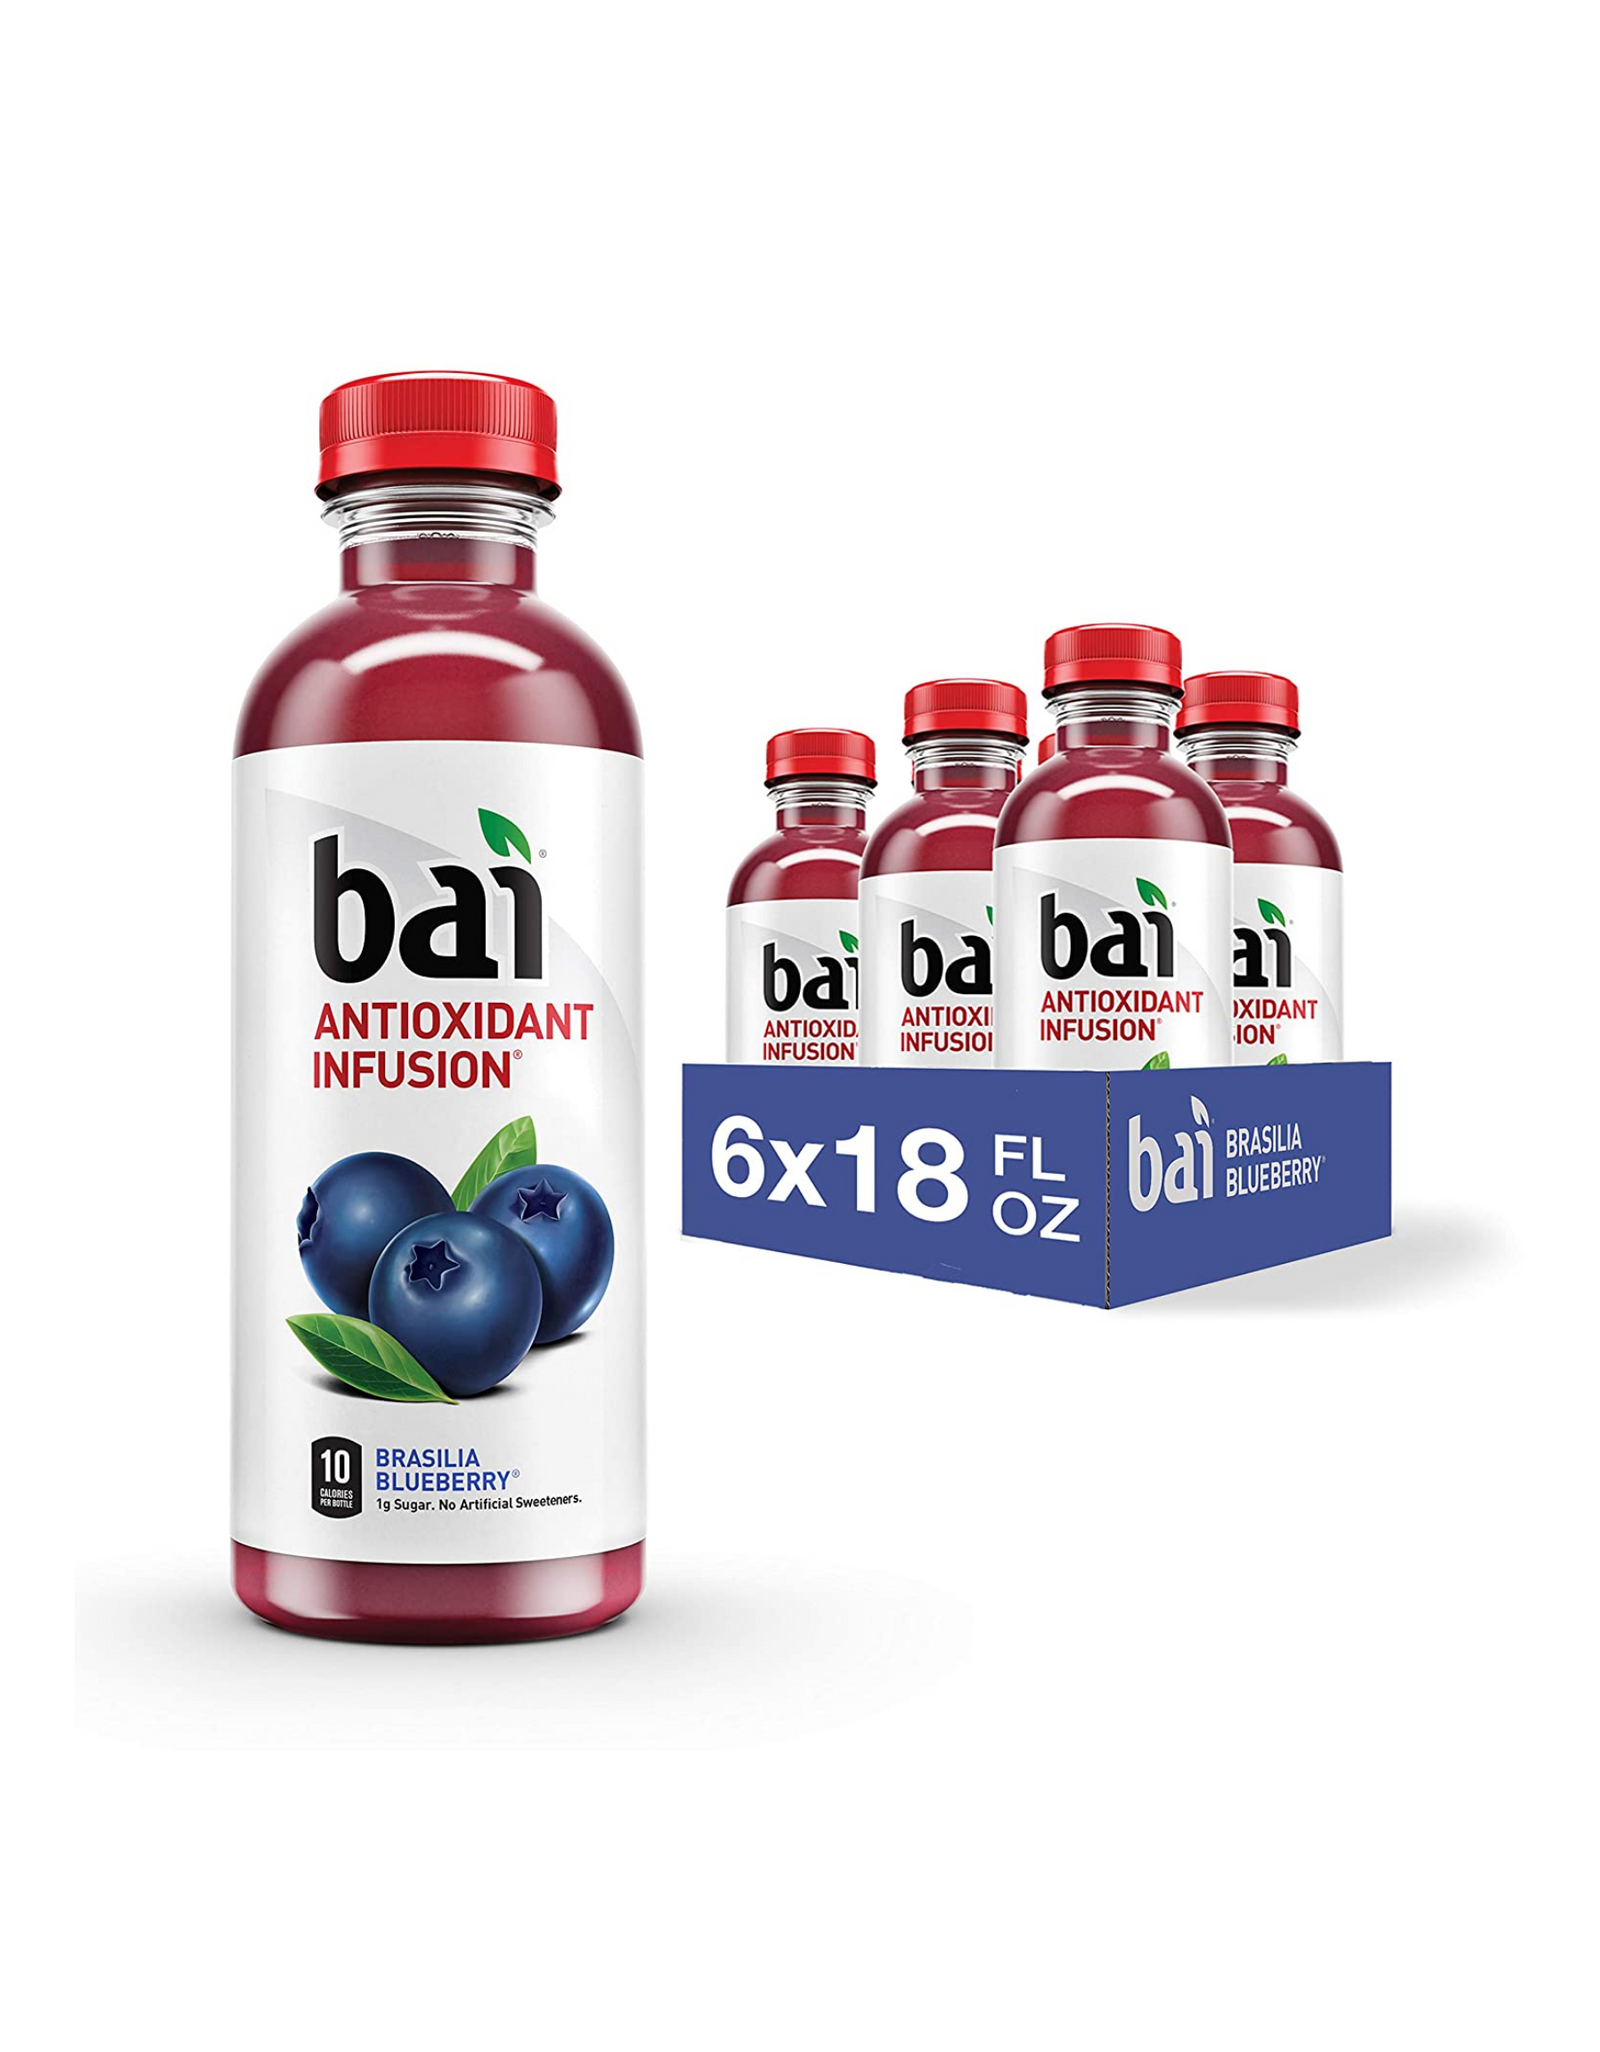 Bai Flavored Water, Brasilia Blueberry, Antioxidant Infusion Drinks, 18 fl oz (Pack of 6)